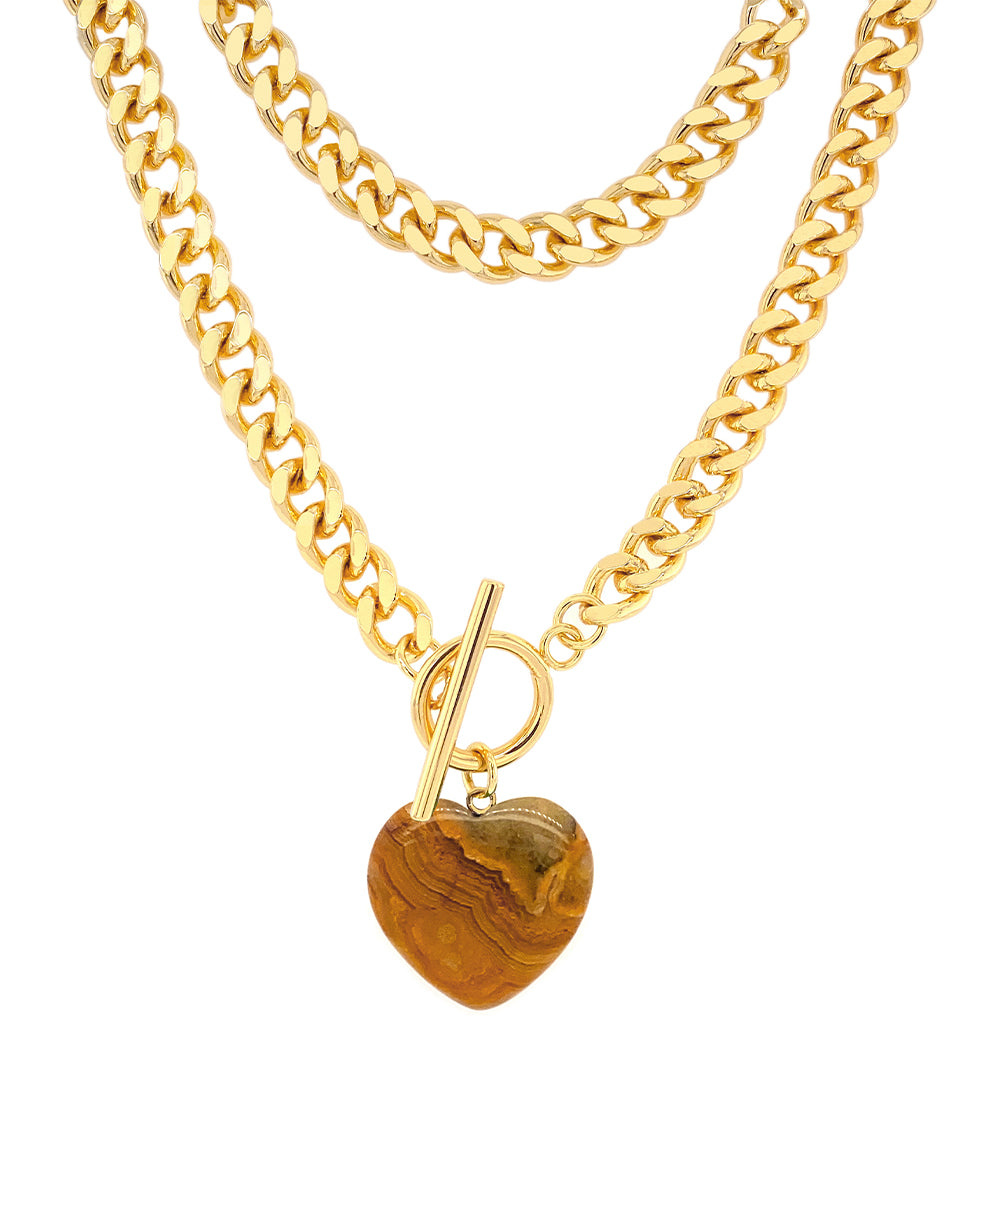 Jurate LA Oh Girl Brown Agate Necklace